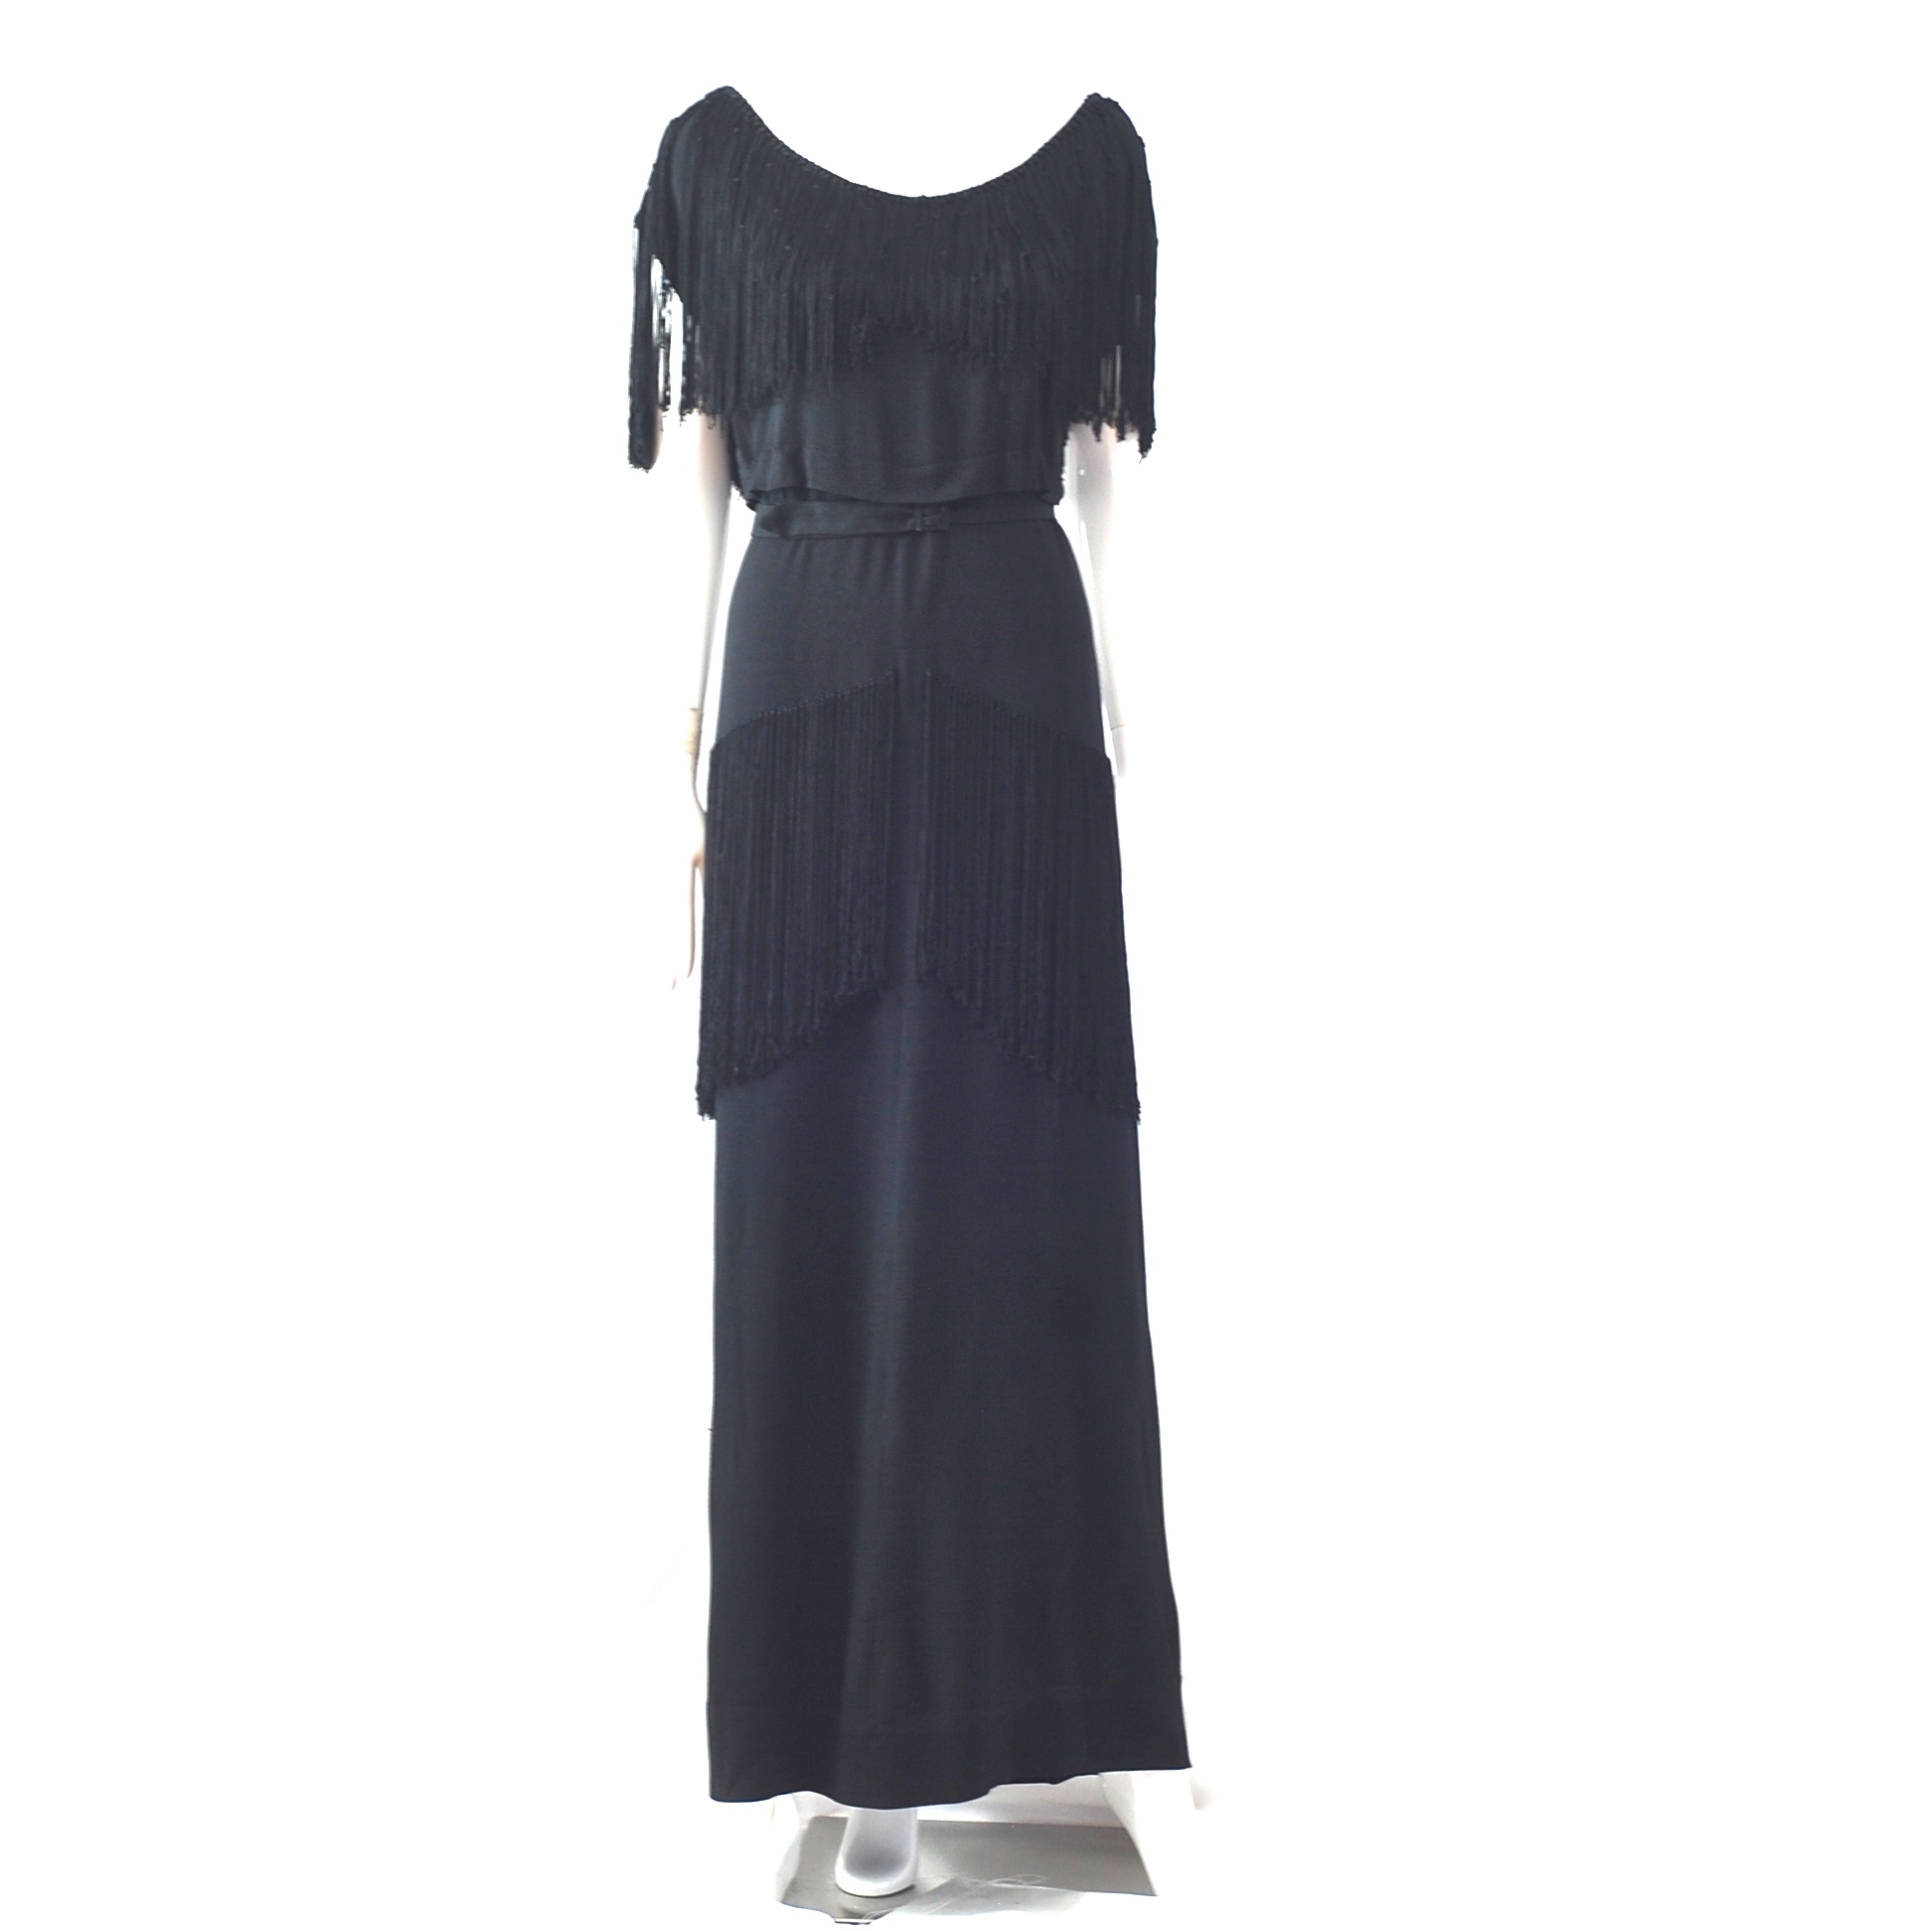 Theodora 1930’s Bias Cut Gown With Fringed Top & Layered Fringe On ...